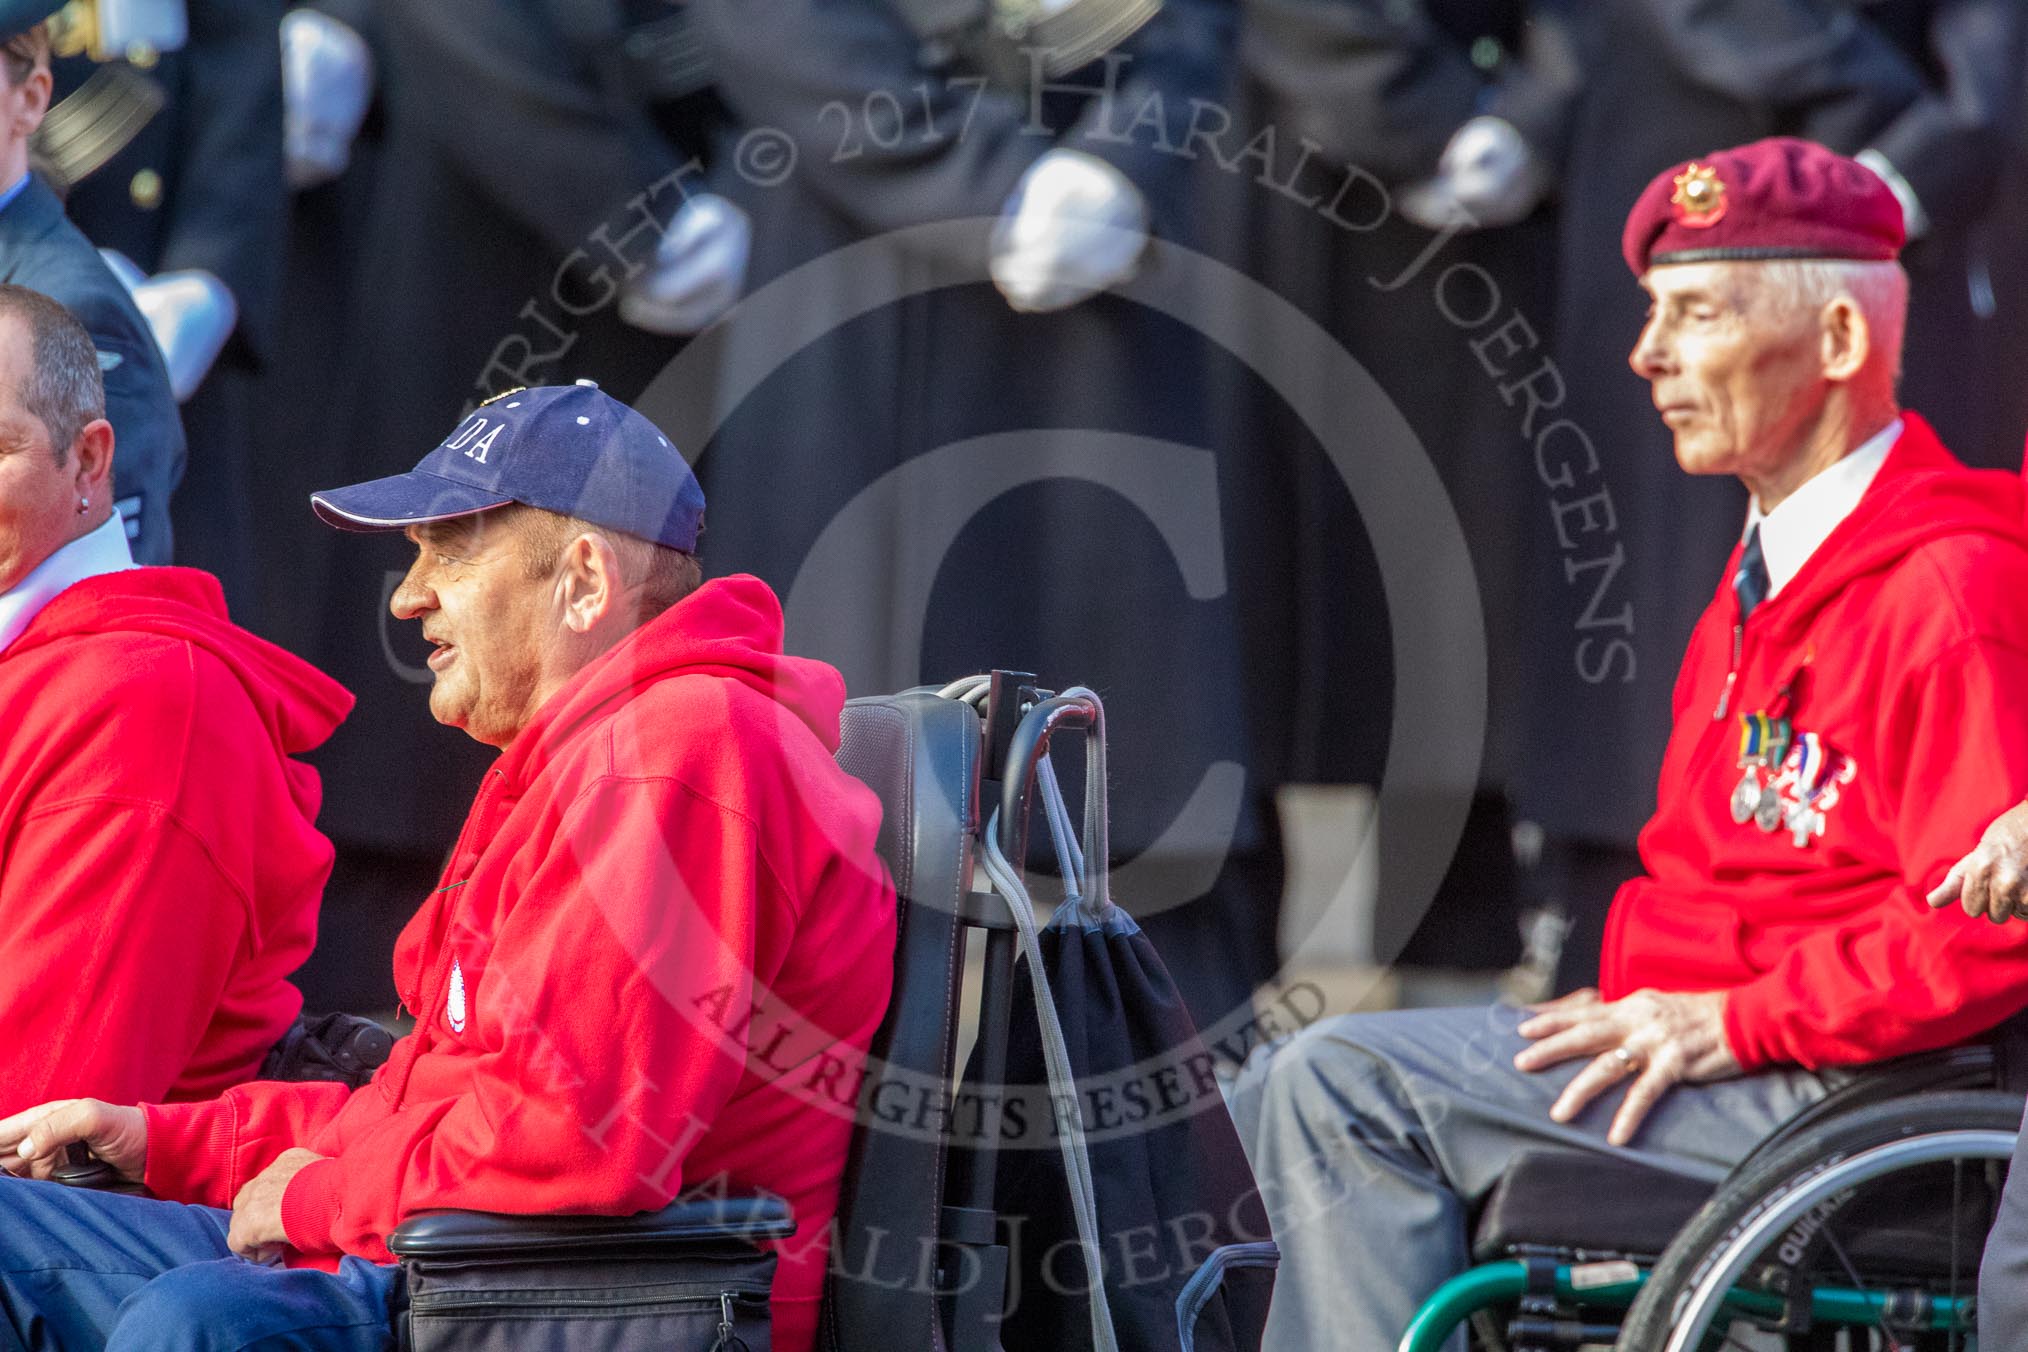 British Ex-Services Wheelchair Sports Association  (Group AA2, 14 members) during the Royal British Legion March Past on Remembrance Sunday at the Cenotaph, Whitehall, Westminster, London, 11 November 2018, 11:48.